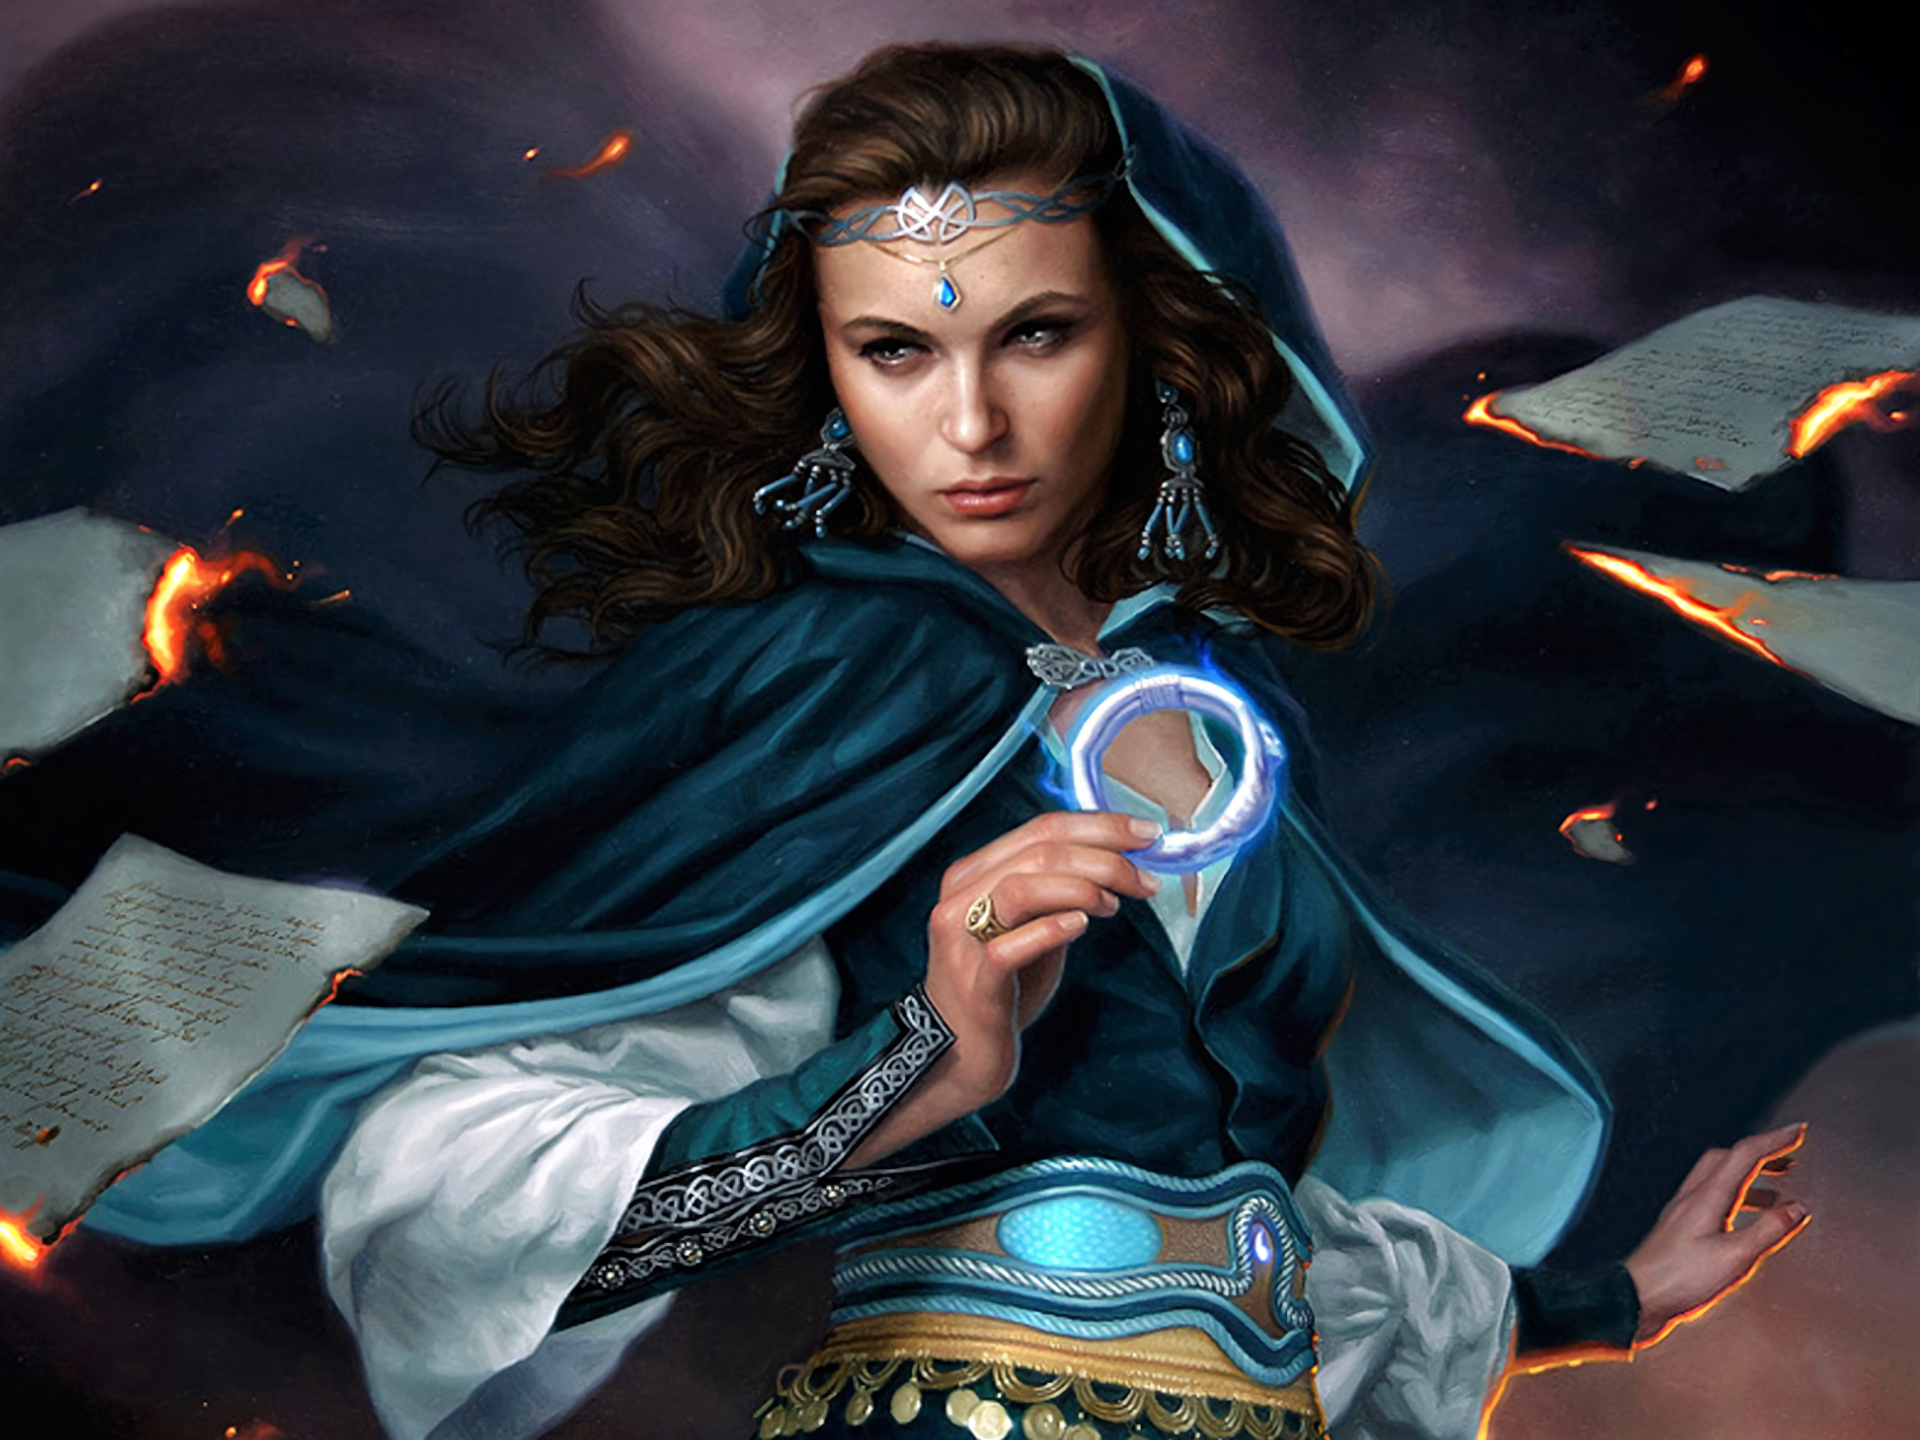 Brown Hair Earrings Fantasy Girl Paper Sorceress The Wheel Of Time Woman 1920x1440